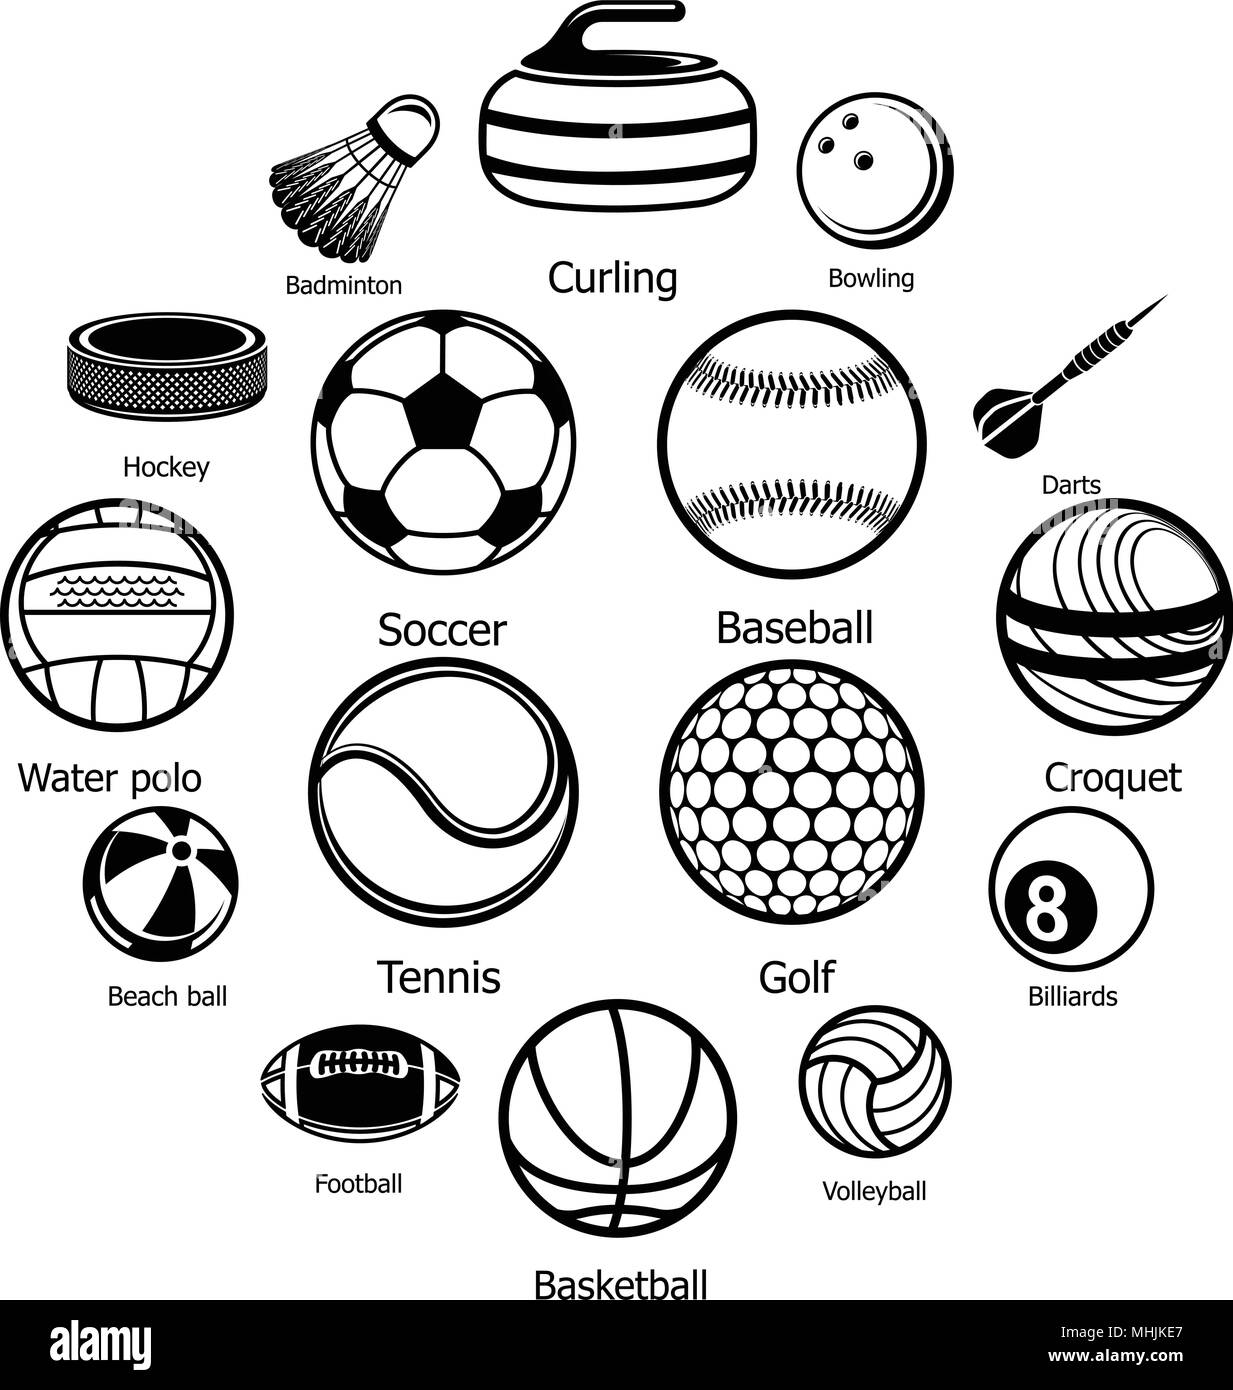 Sport balls equipment icons set, simple style Stock Vector Image ...